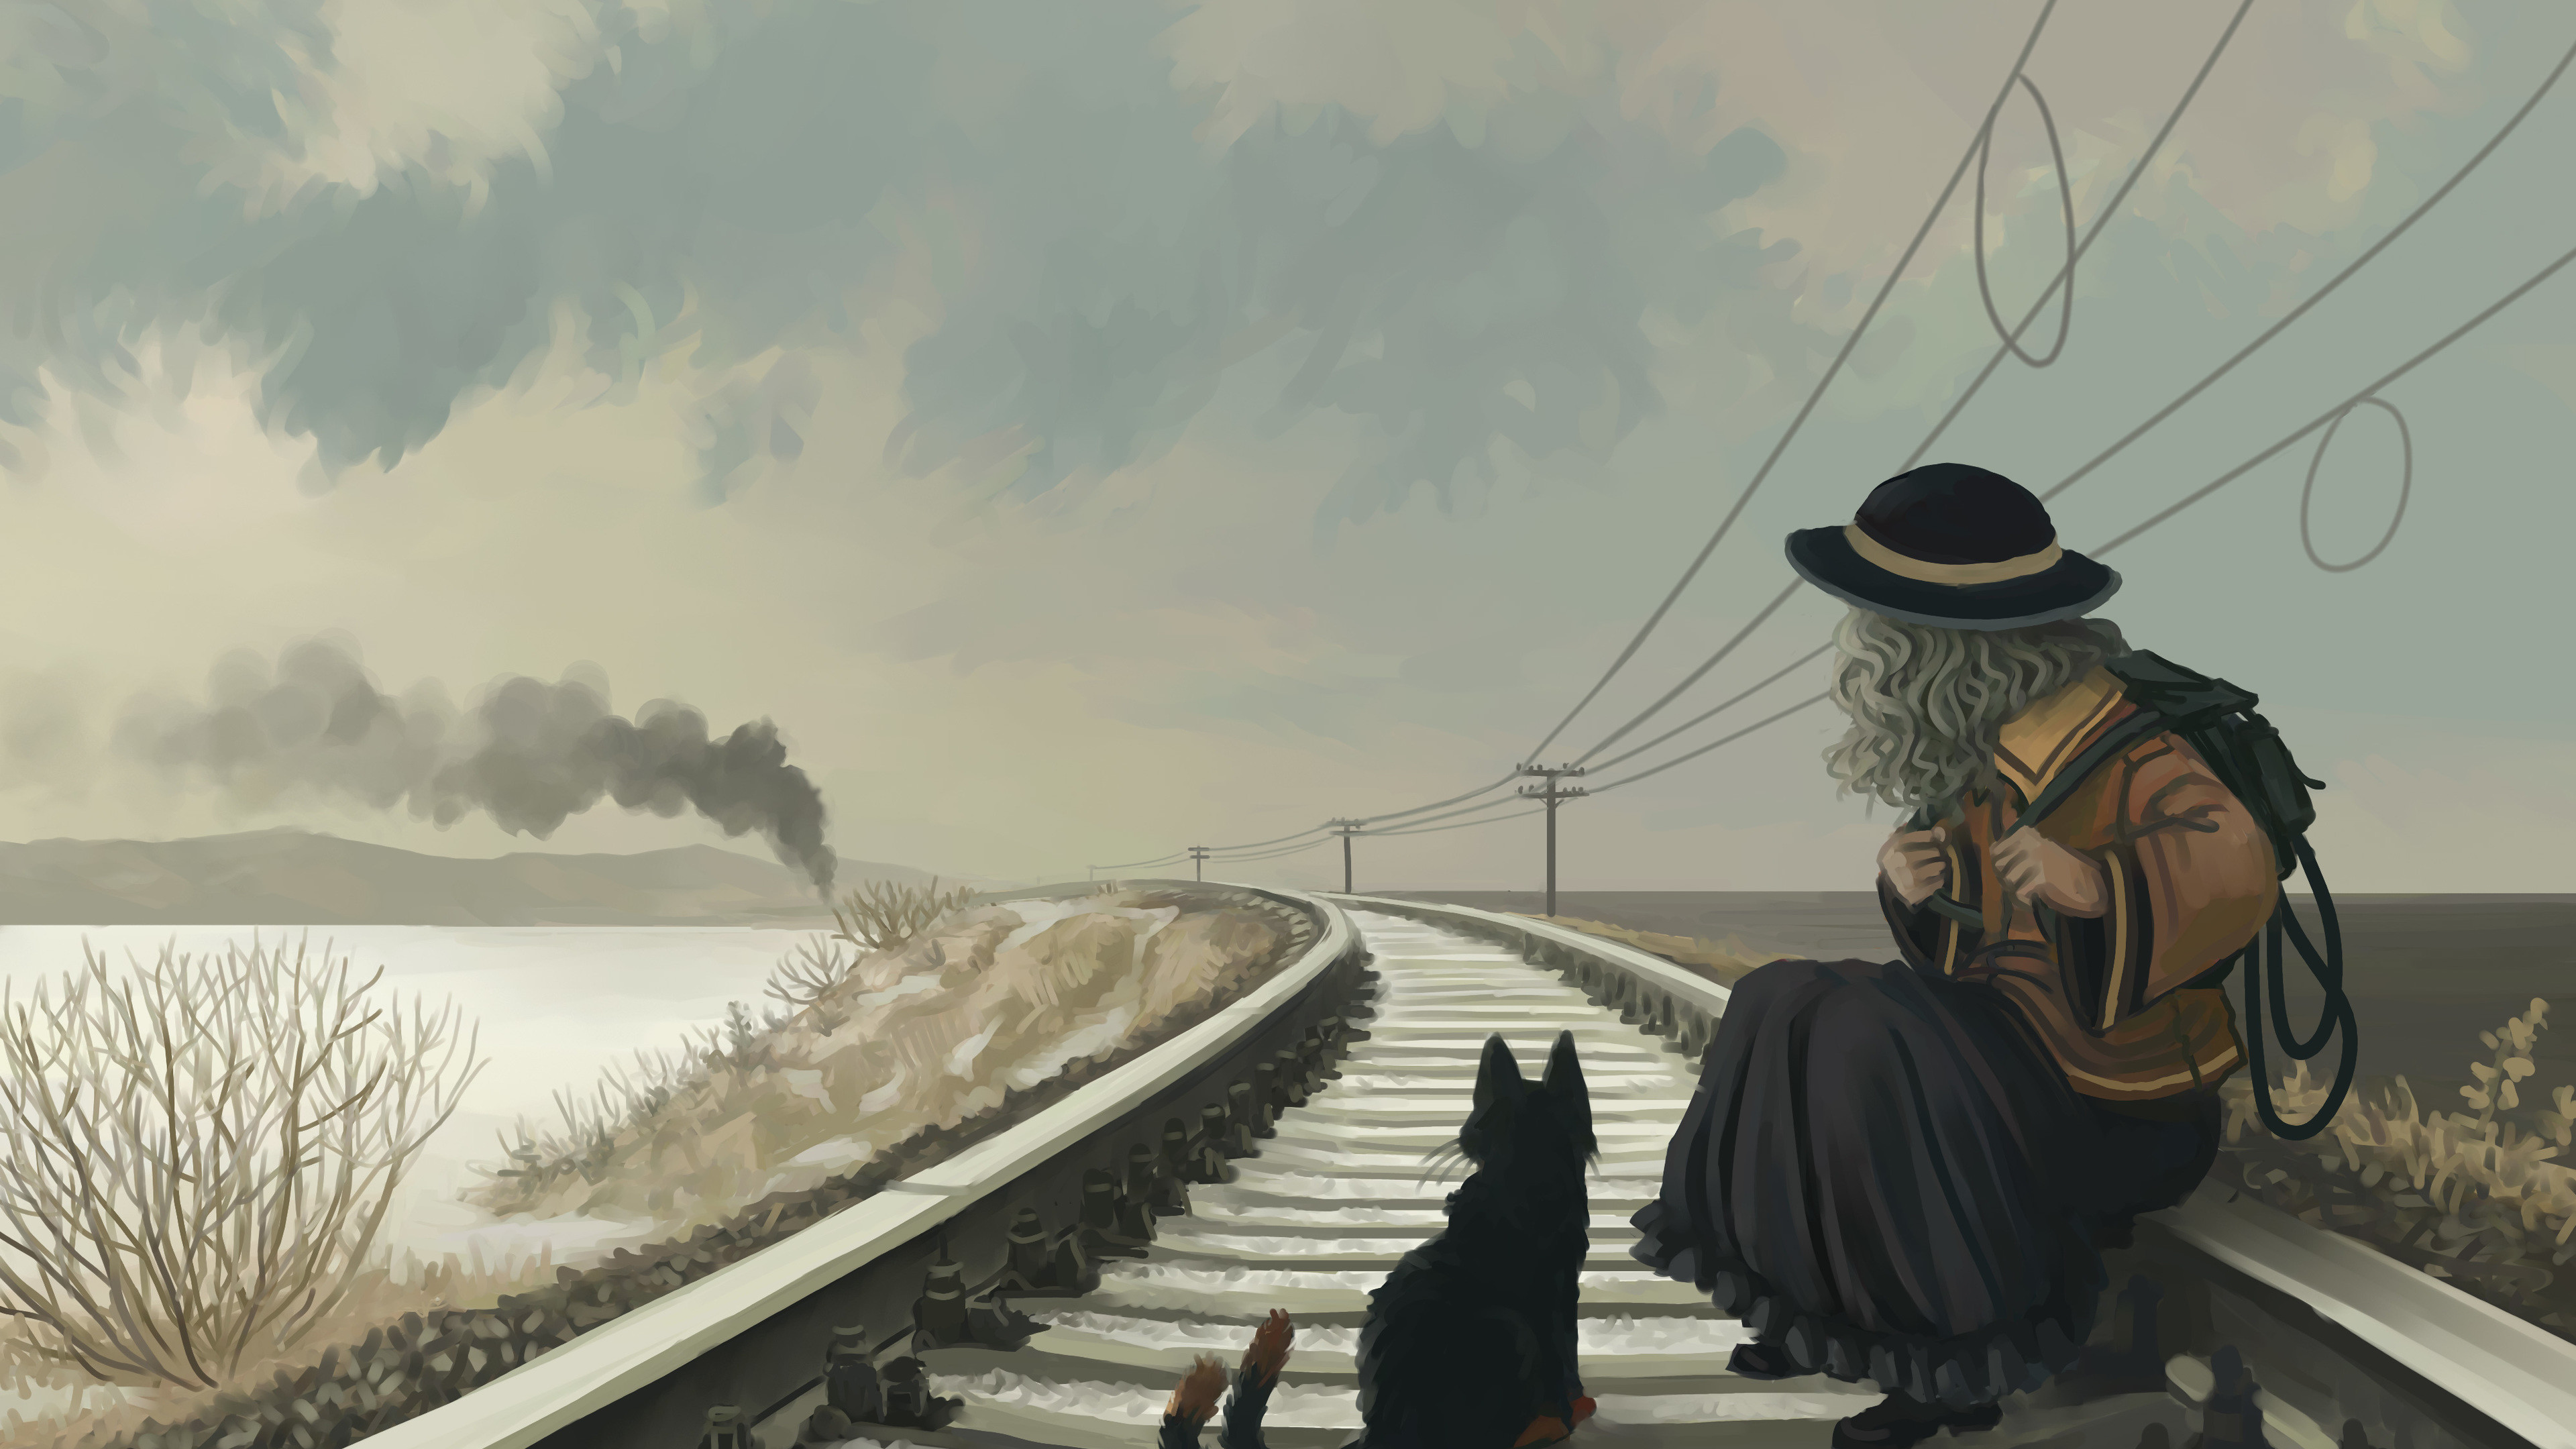 3840x2160 Anime Girl With Cat On Railroad